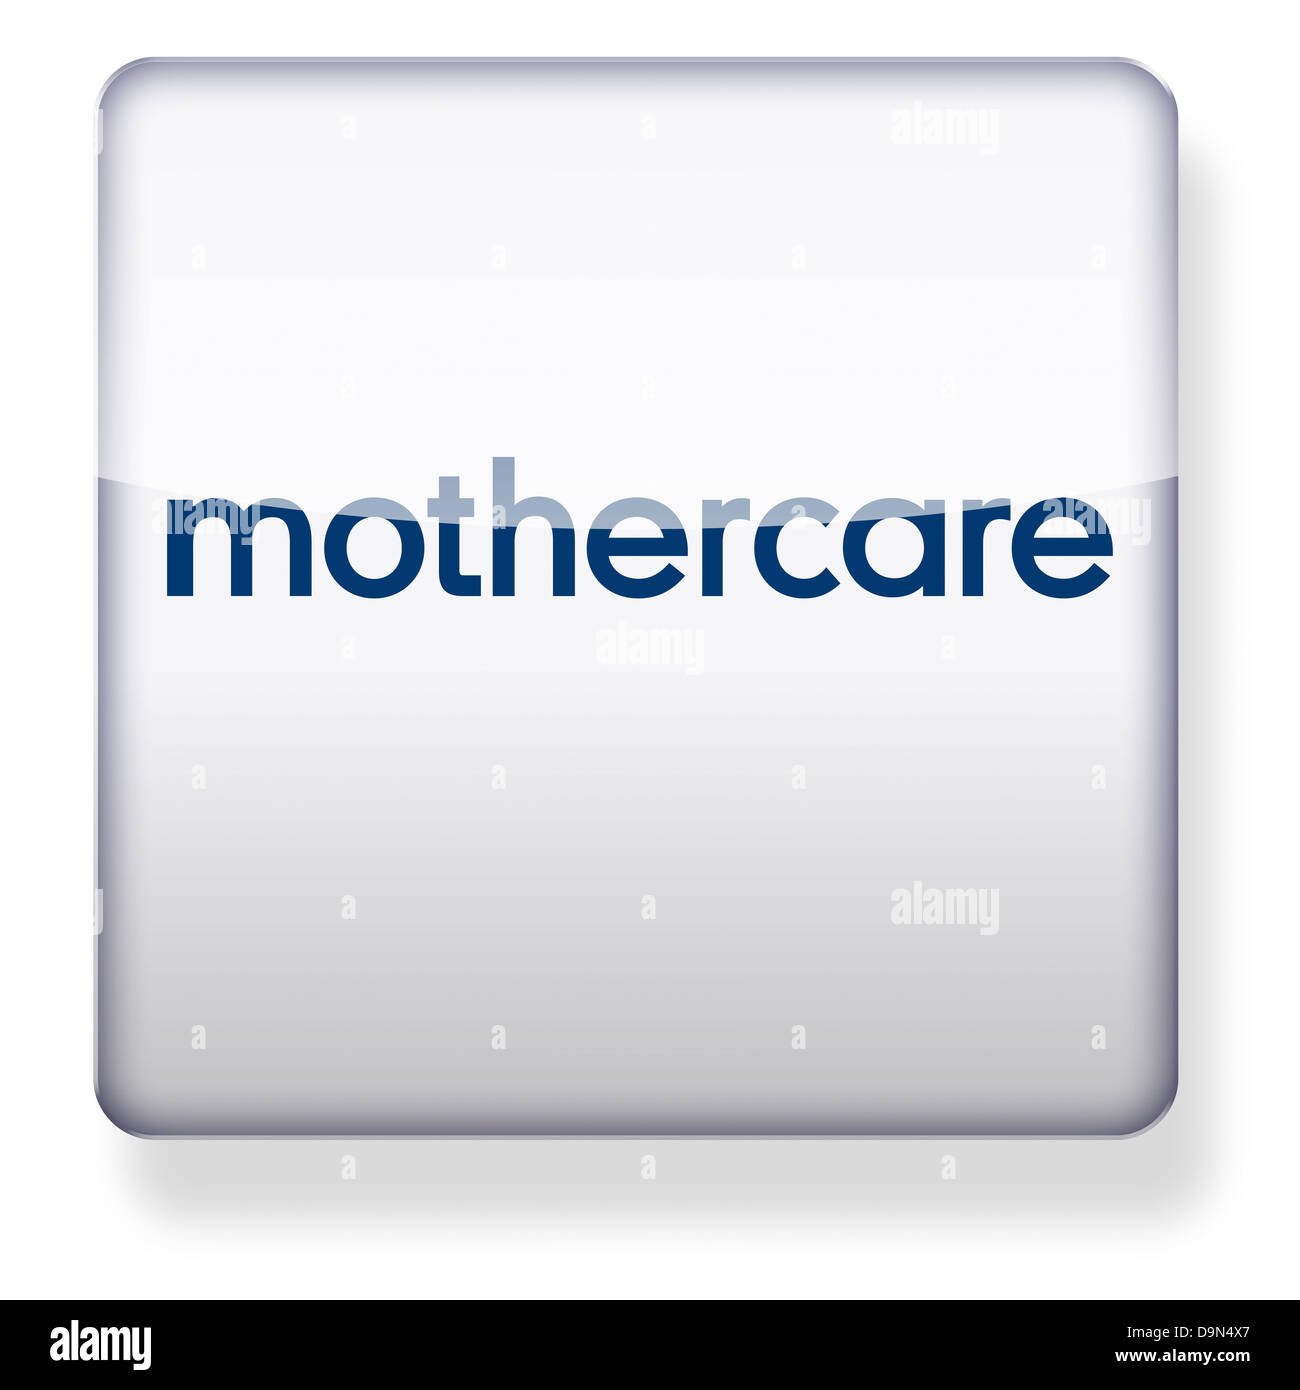 Mothercare logo as an app icon. Clipping path included. Stock Photo